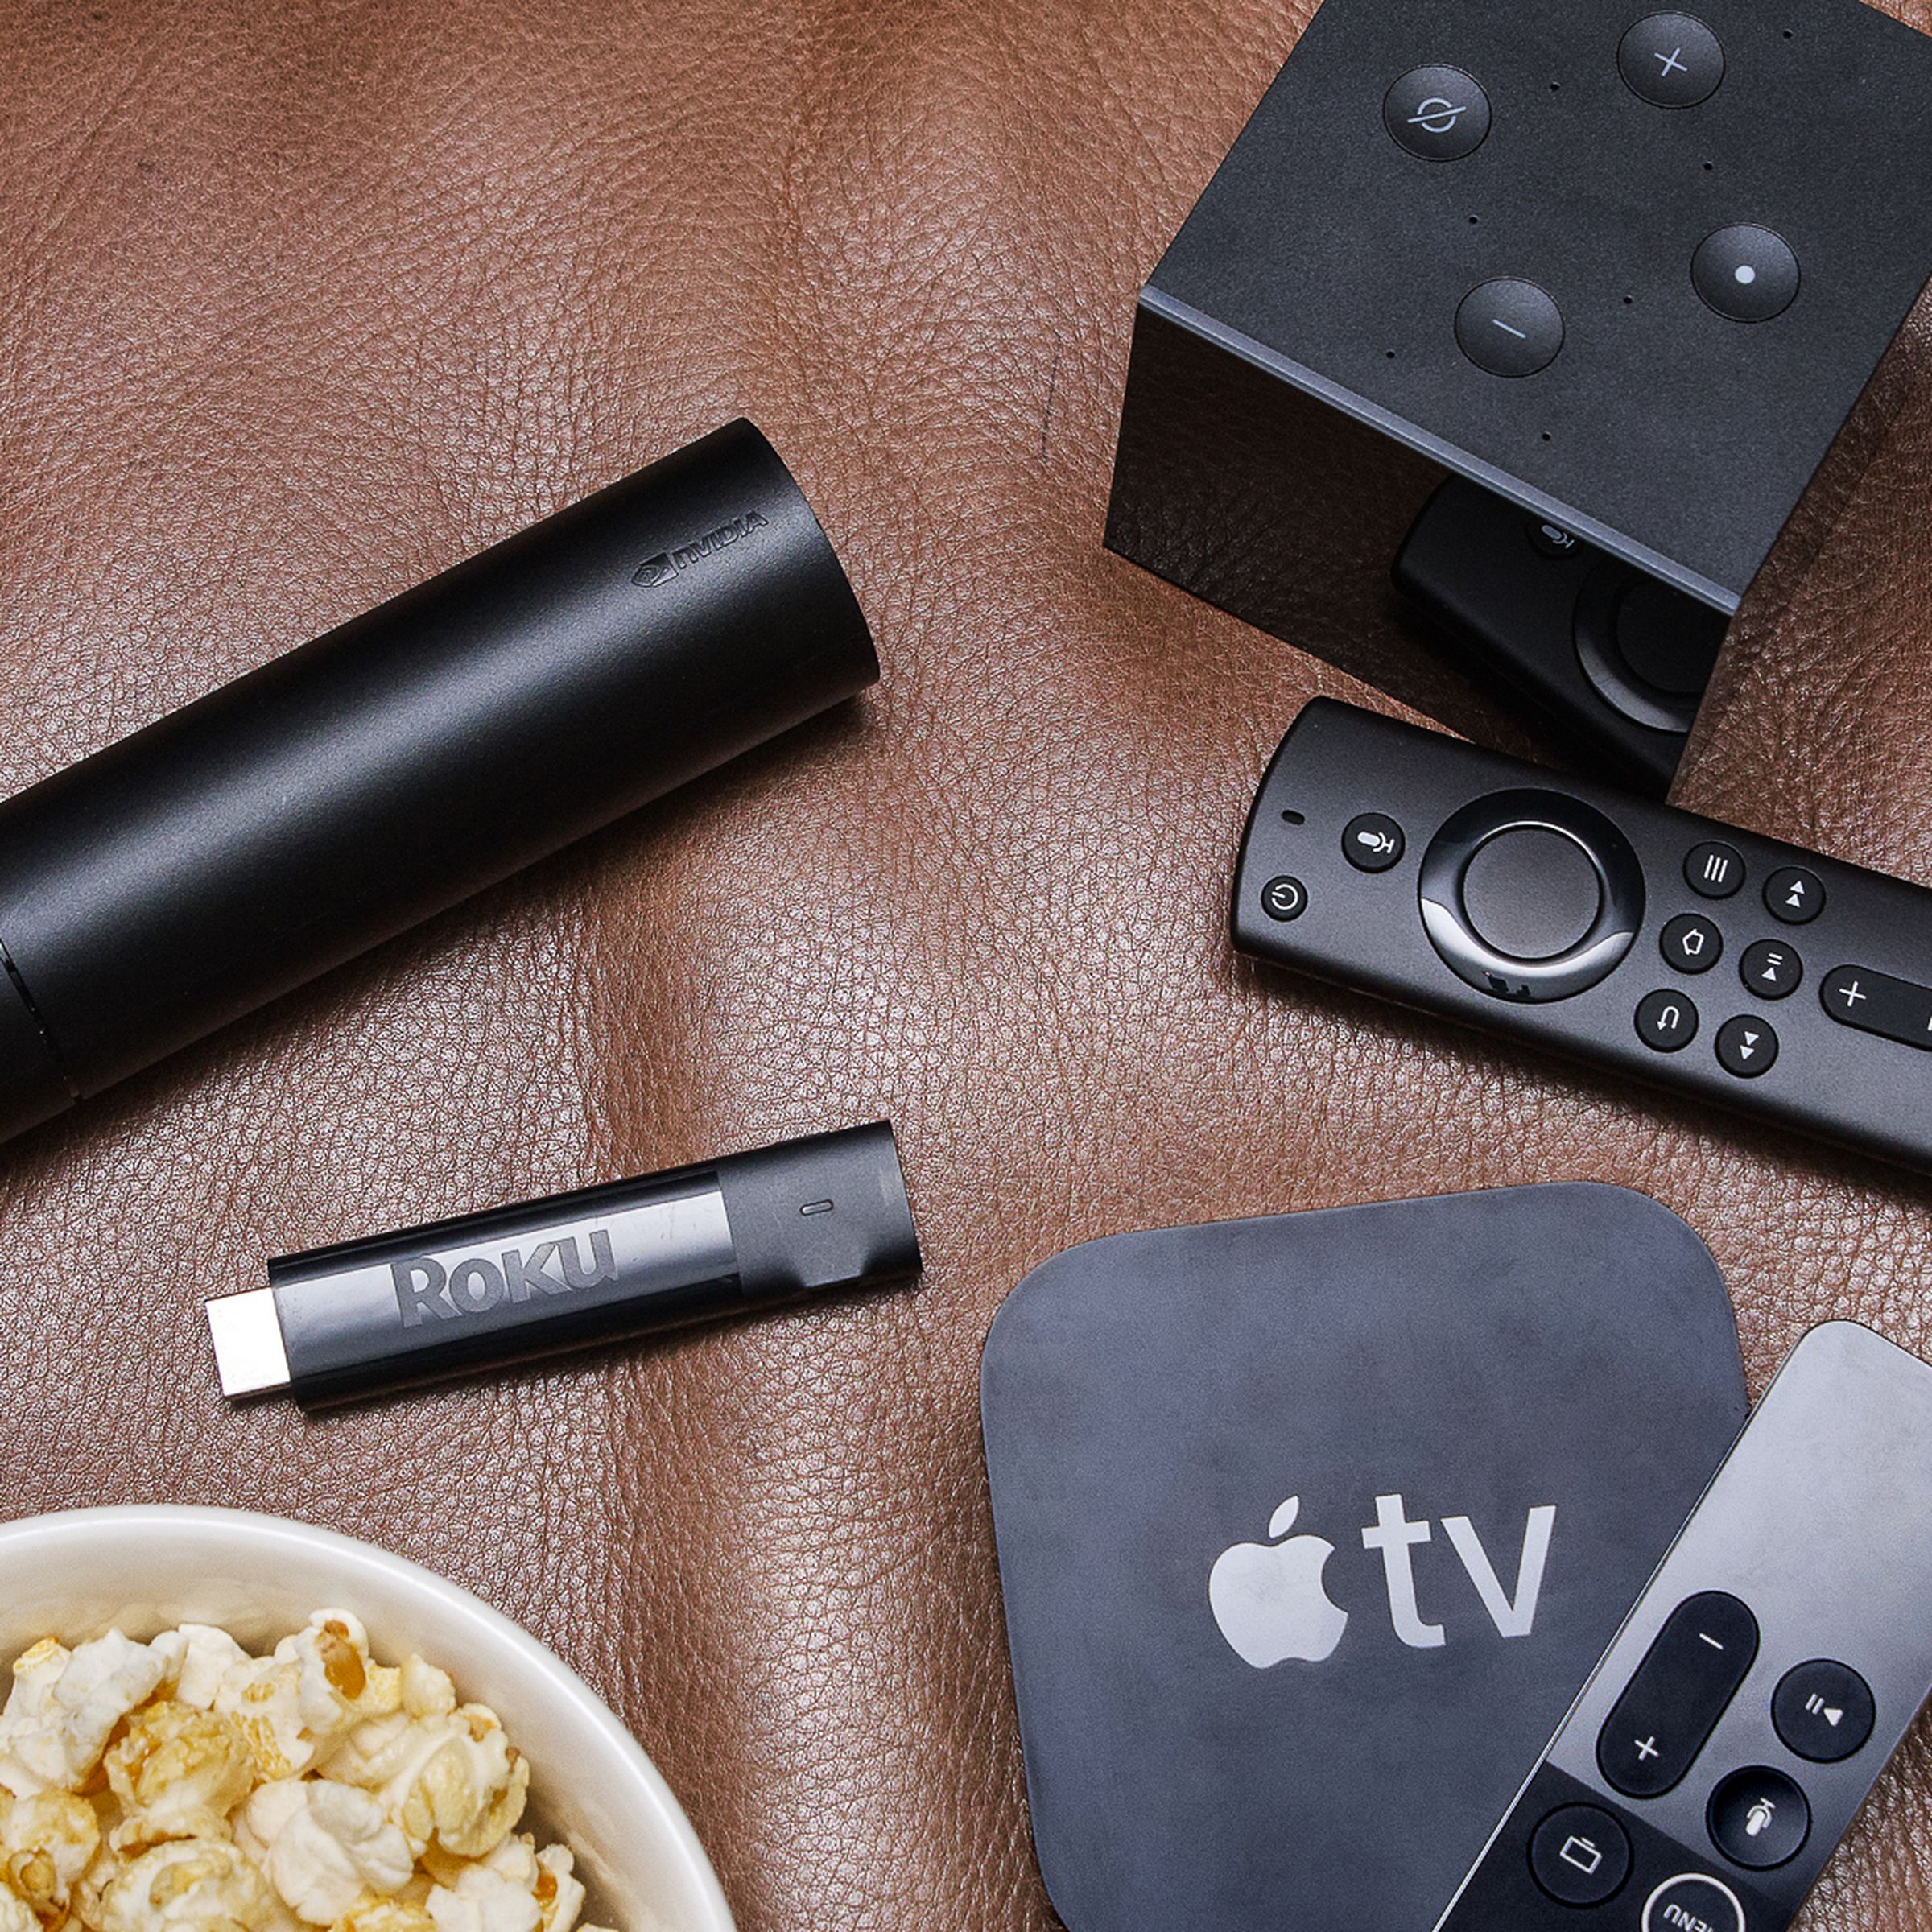 The Apple TV 4K, Amazon Fire Cube, Roku Streaming Stick, and Nvidia Shield streaming devices and remotes laid out on a brown leather couch next to a bowl of popcorn.